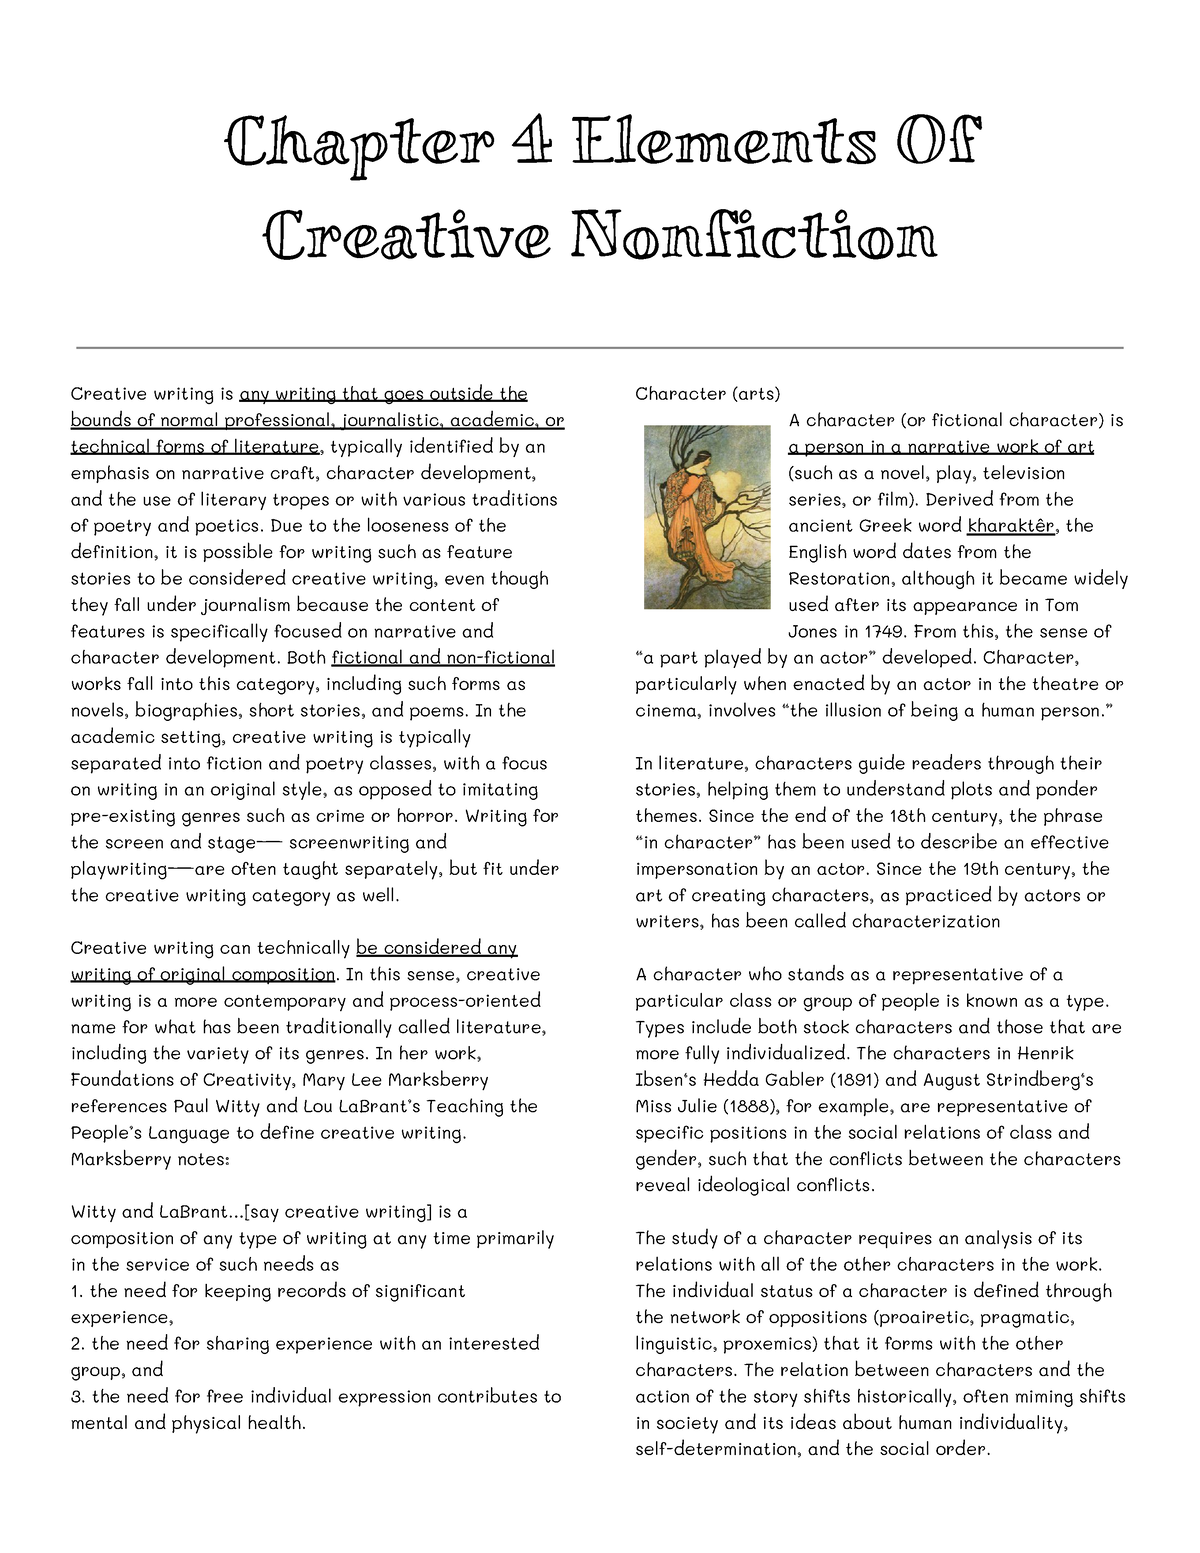 creative nonfiction writing assignment